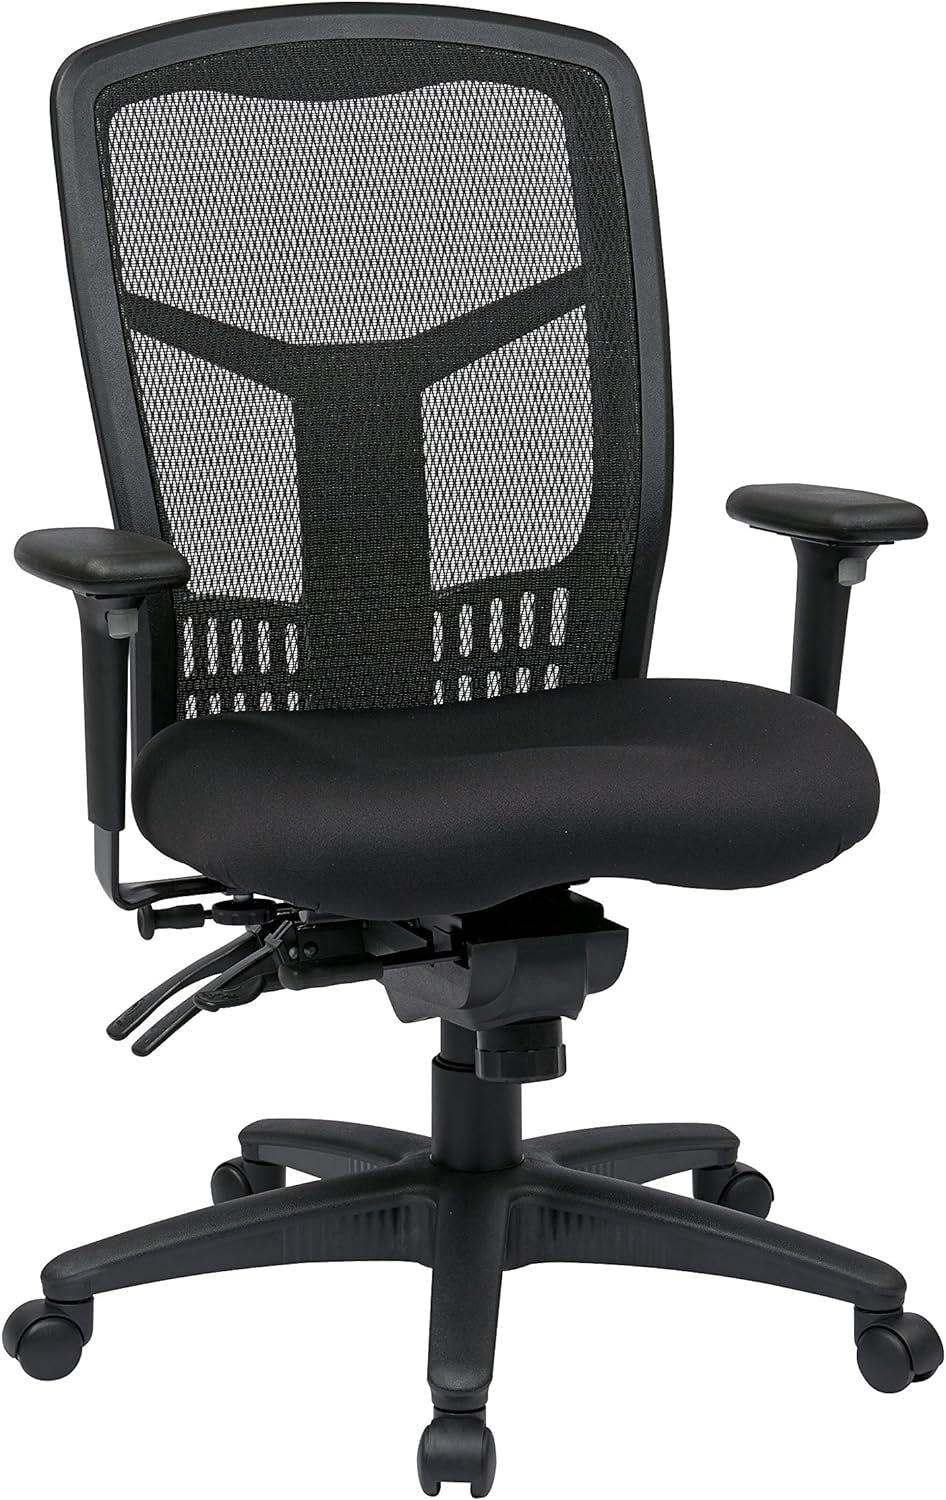 ProGrid High-Back Executive Office Chair in Coal FreeFlex Fabric